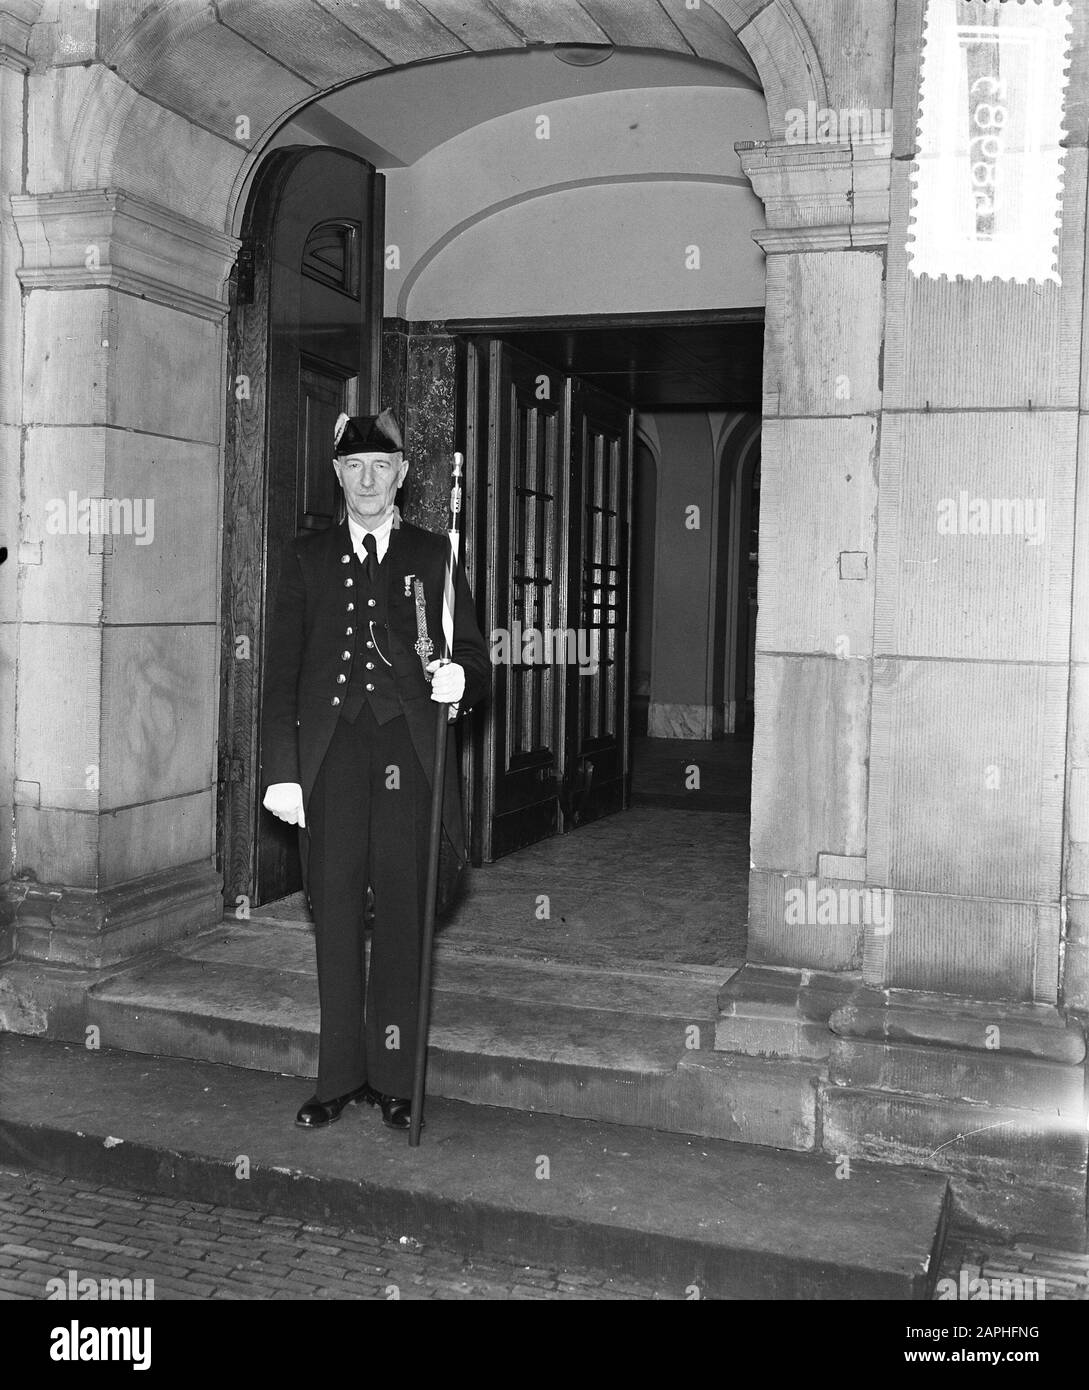 Bode L. V. Bos 40 years municipal service Amsterdam Date: 20 December 1954 Location: Amsterdam, Noord-Holland Personal name: L. V. Bos Stock Photo